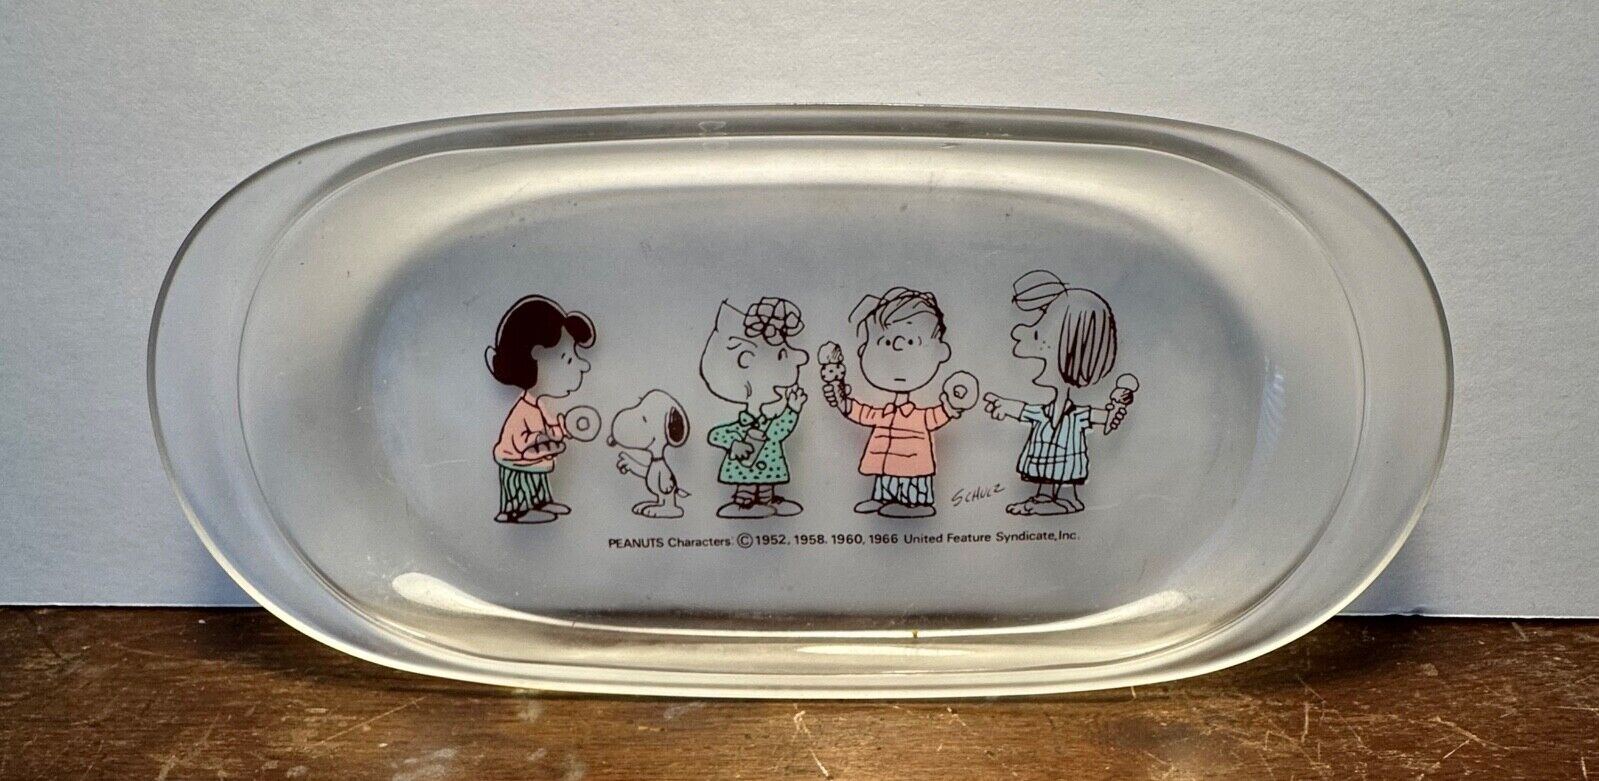 PEANUTS CHARACTERS GLASS DISH WITH 5 CHARACTERS ON DISH GLOSSY AND MATTE FINISH